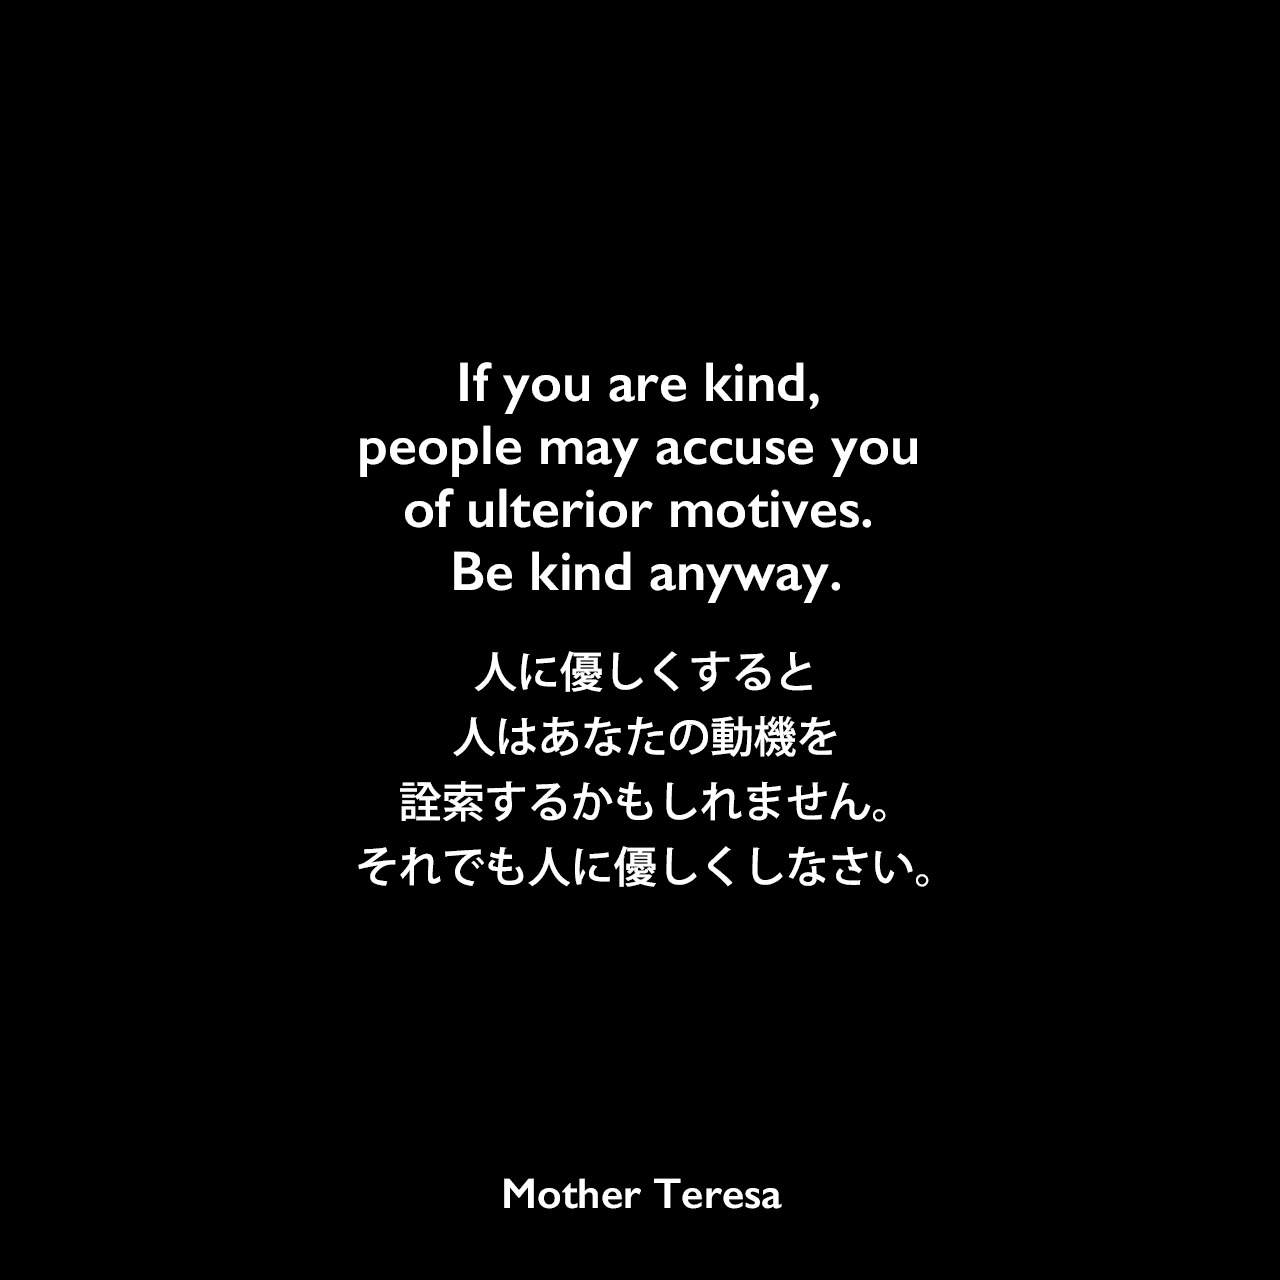 If you are kind, people may accuse you of ulterior motives. Be kind anyway.人に優しくすると、人はあなたの動機を詮索するかもしれません。それでも人に優しくしなさい。Mother Teresa